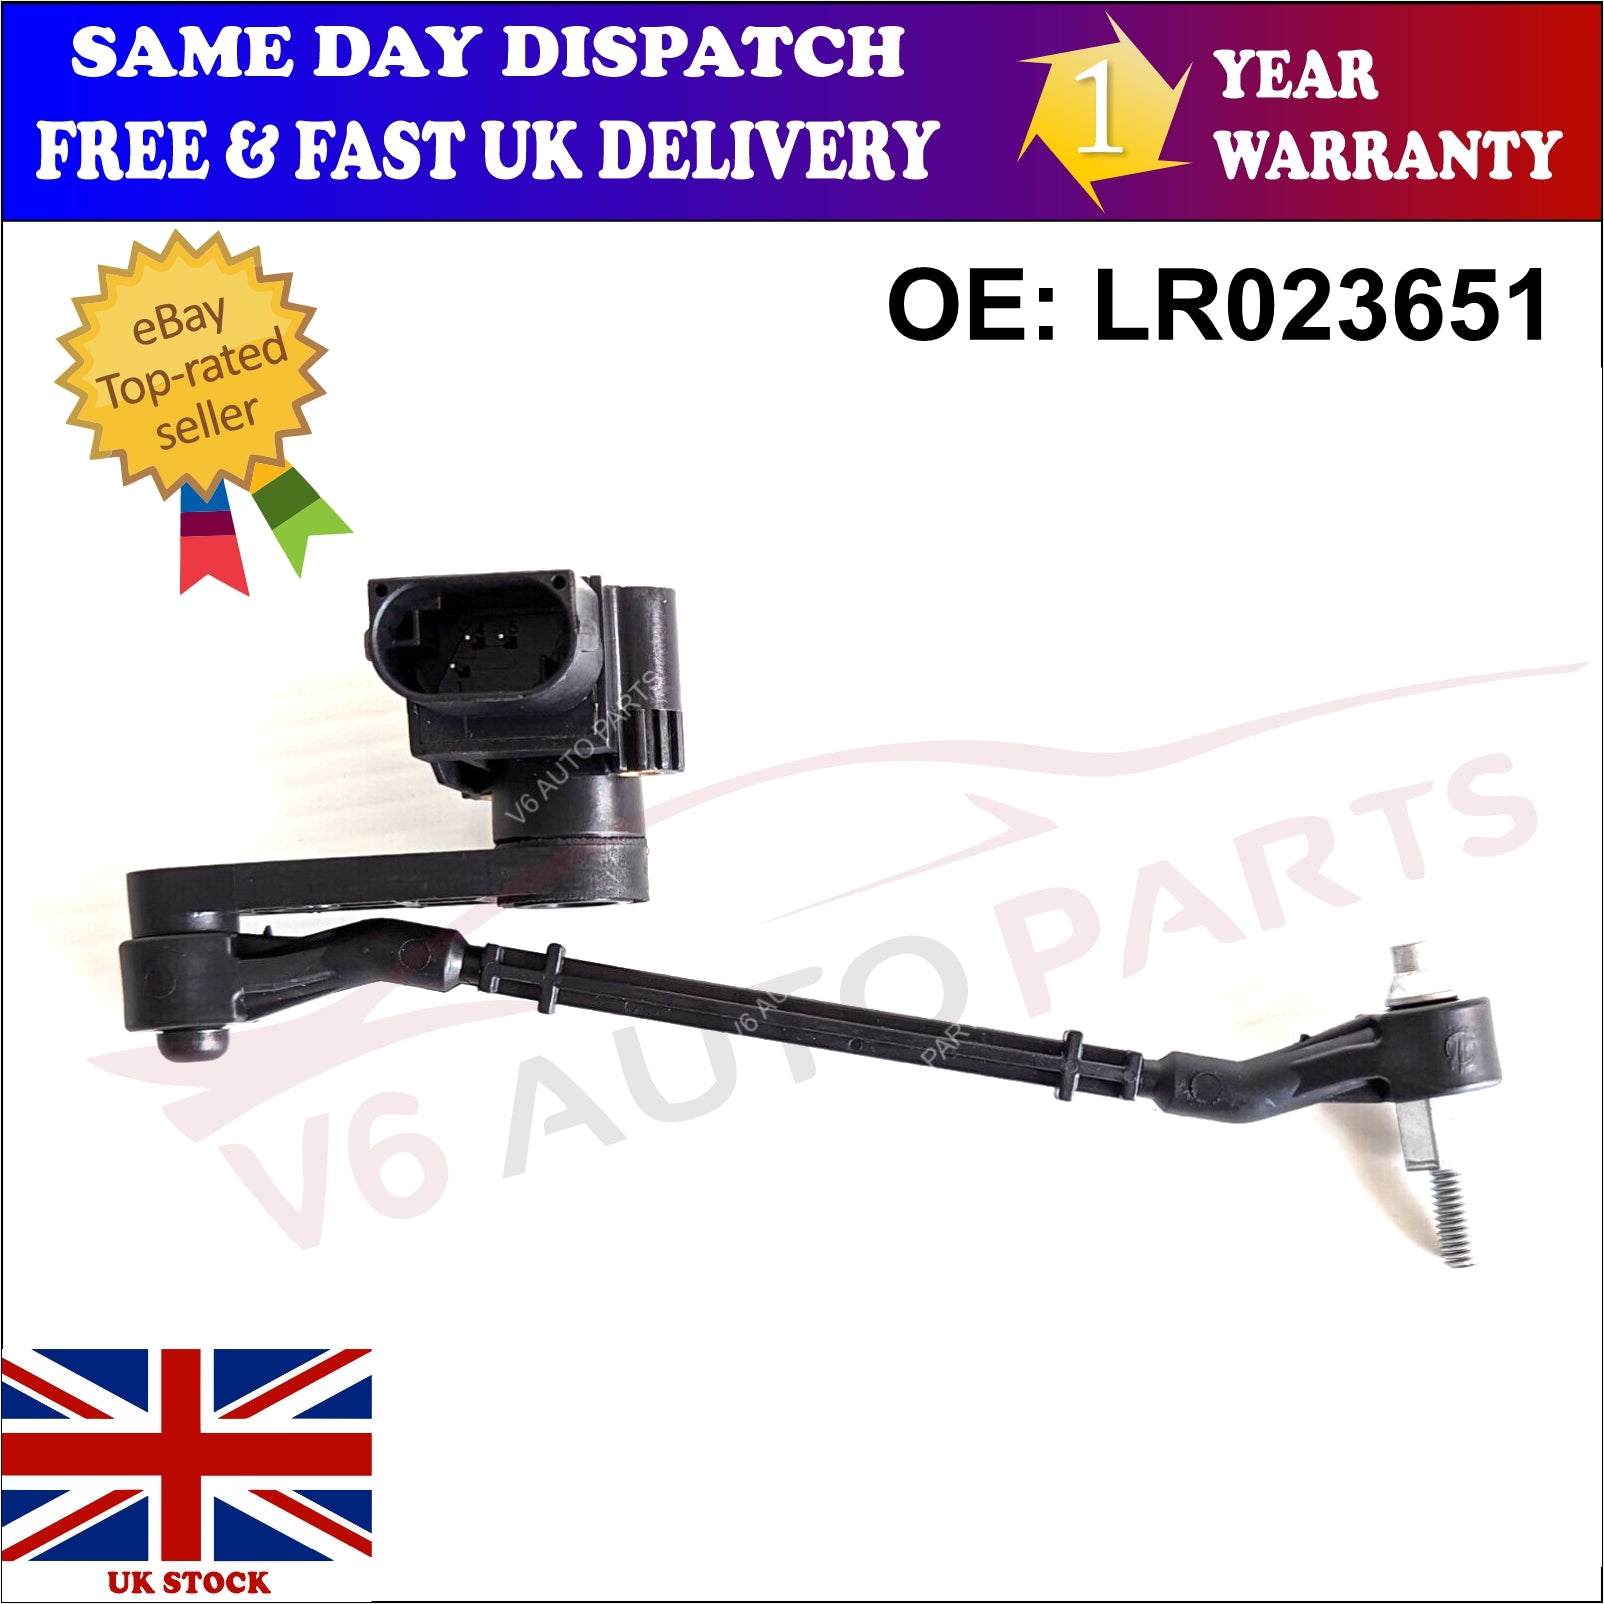 2010 - 12 Range Rover Headlight Sensor With Continuous Variable Damping LR023651